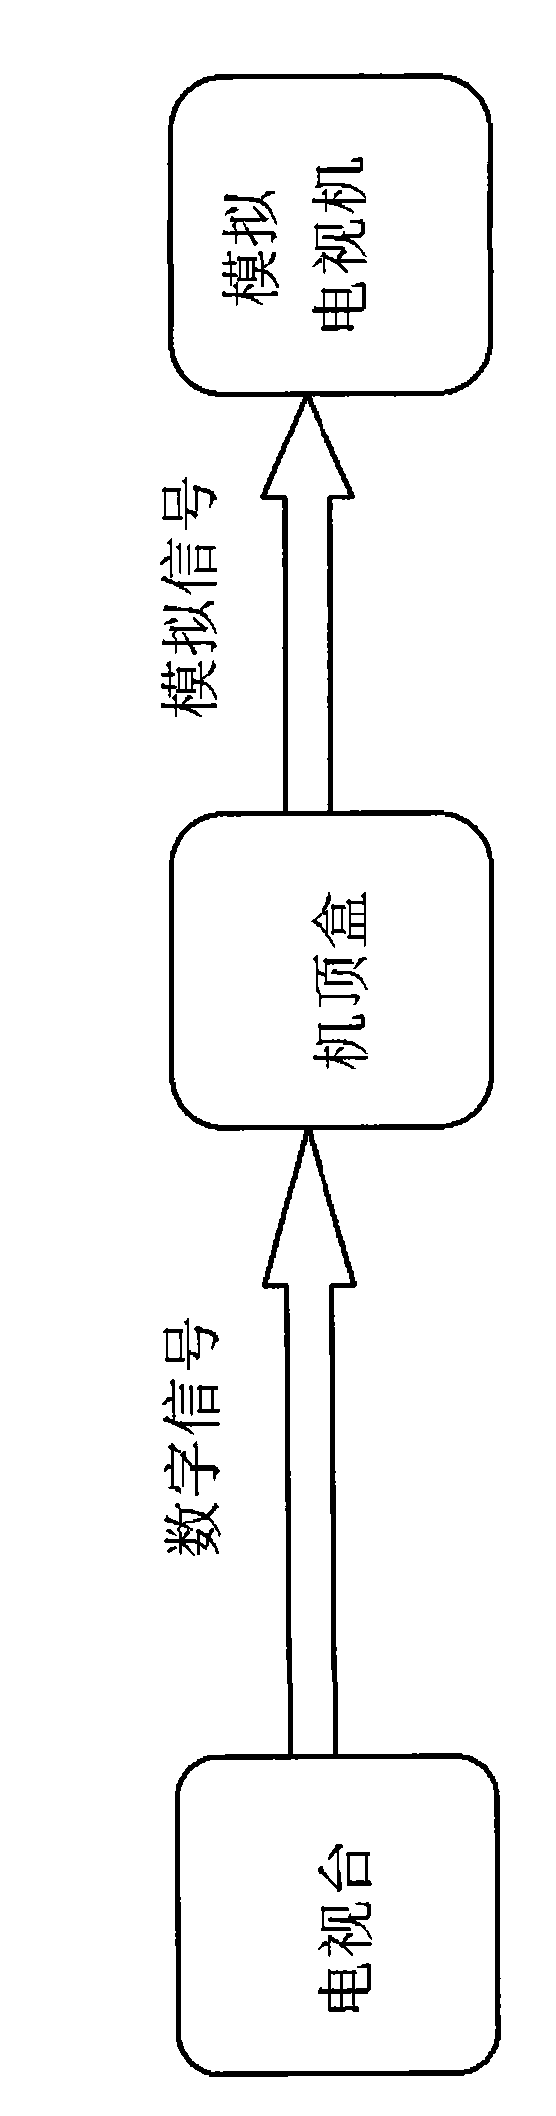 Multisystem digital television signal front end processing device and digital television broadcasting system